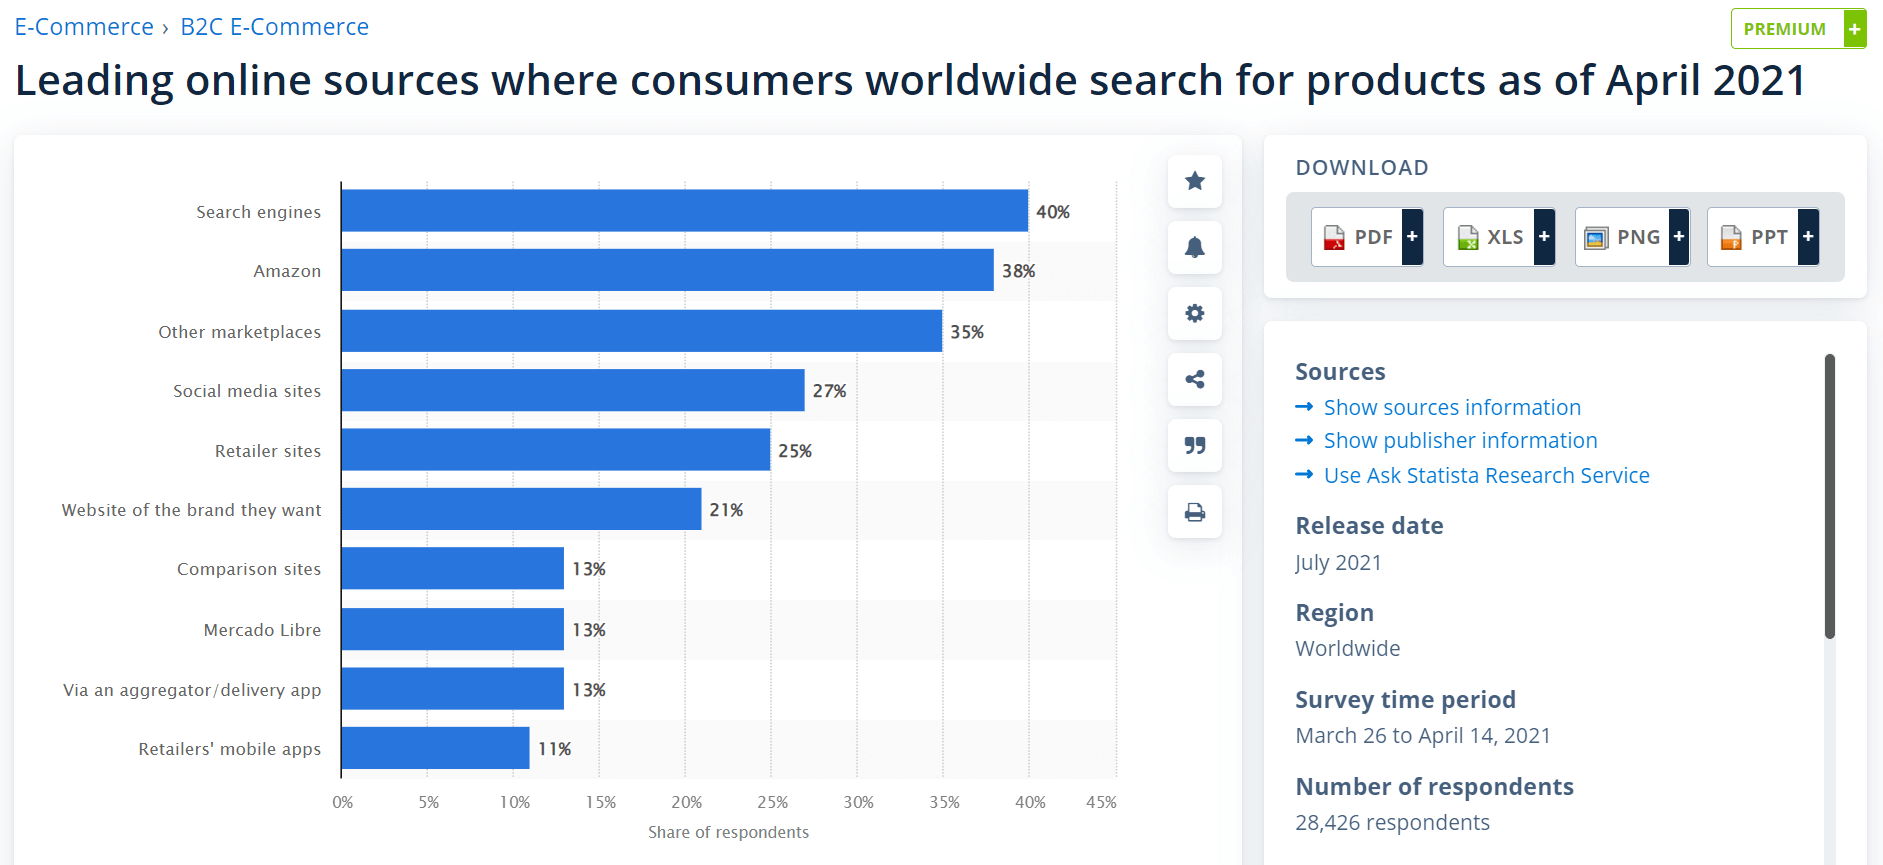 Leading sources for online product searches